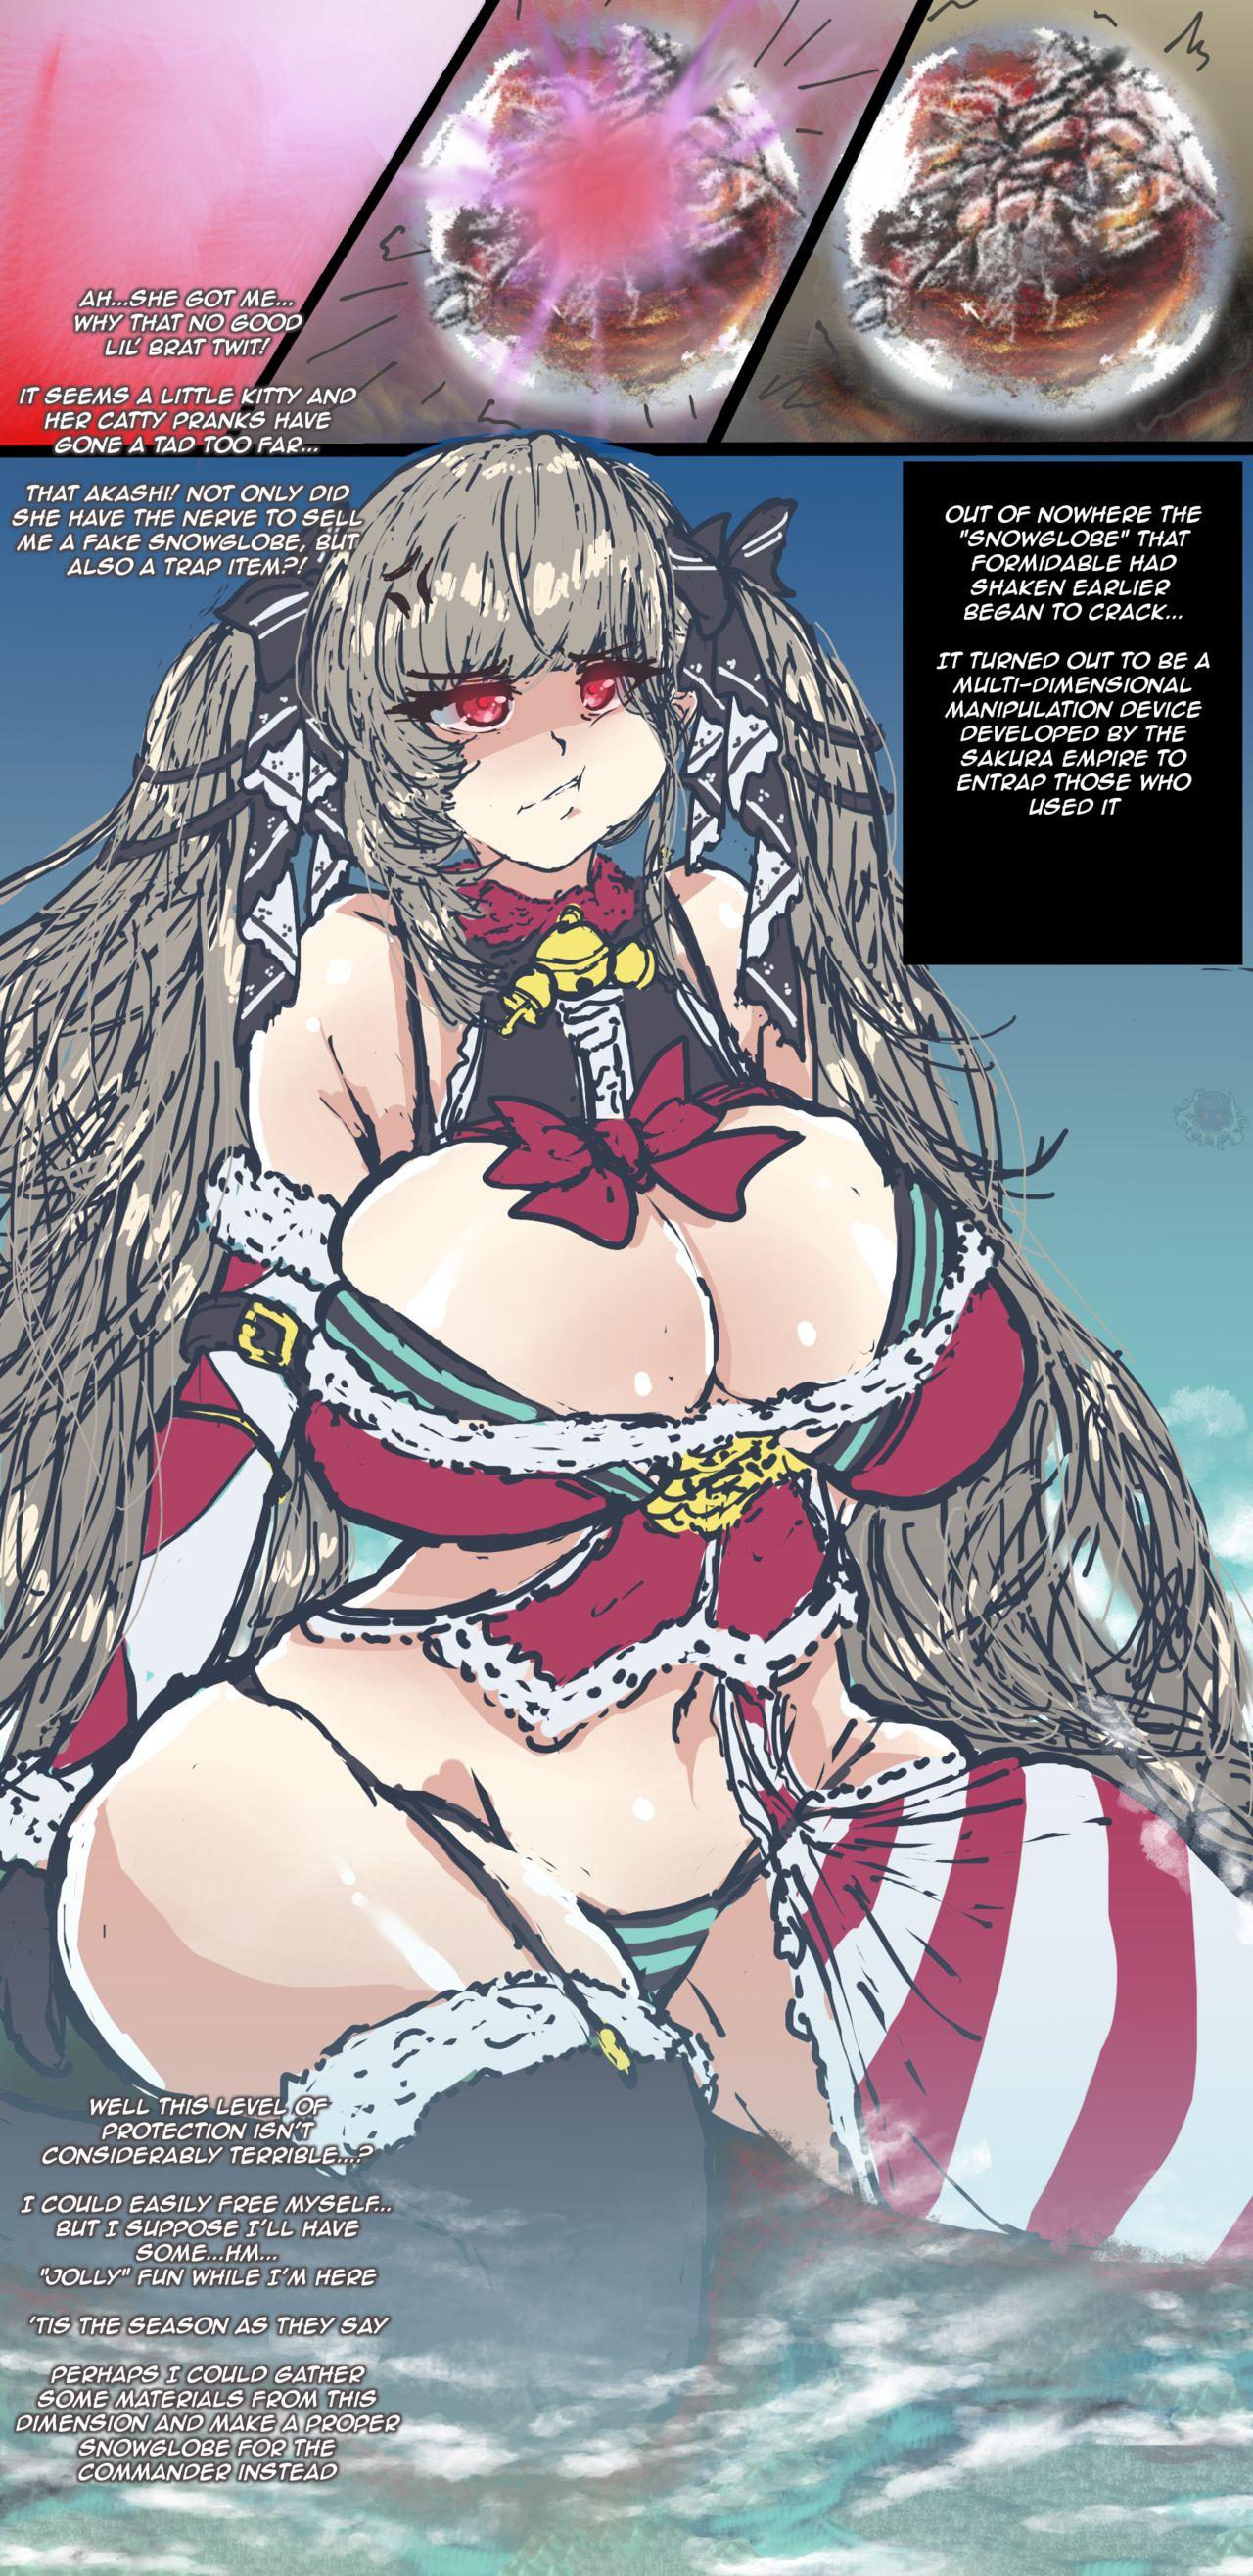 Young Men Merry Formidable Christmas - Azur lane Doublepenetration - Page 4